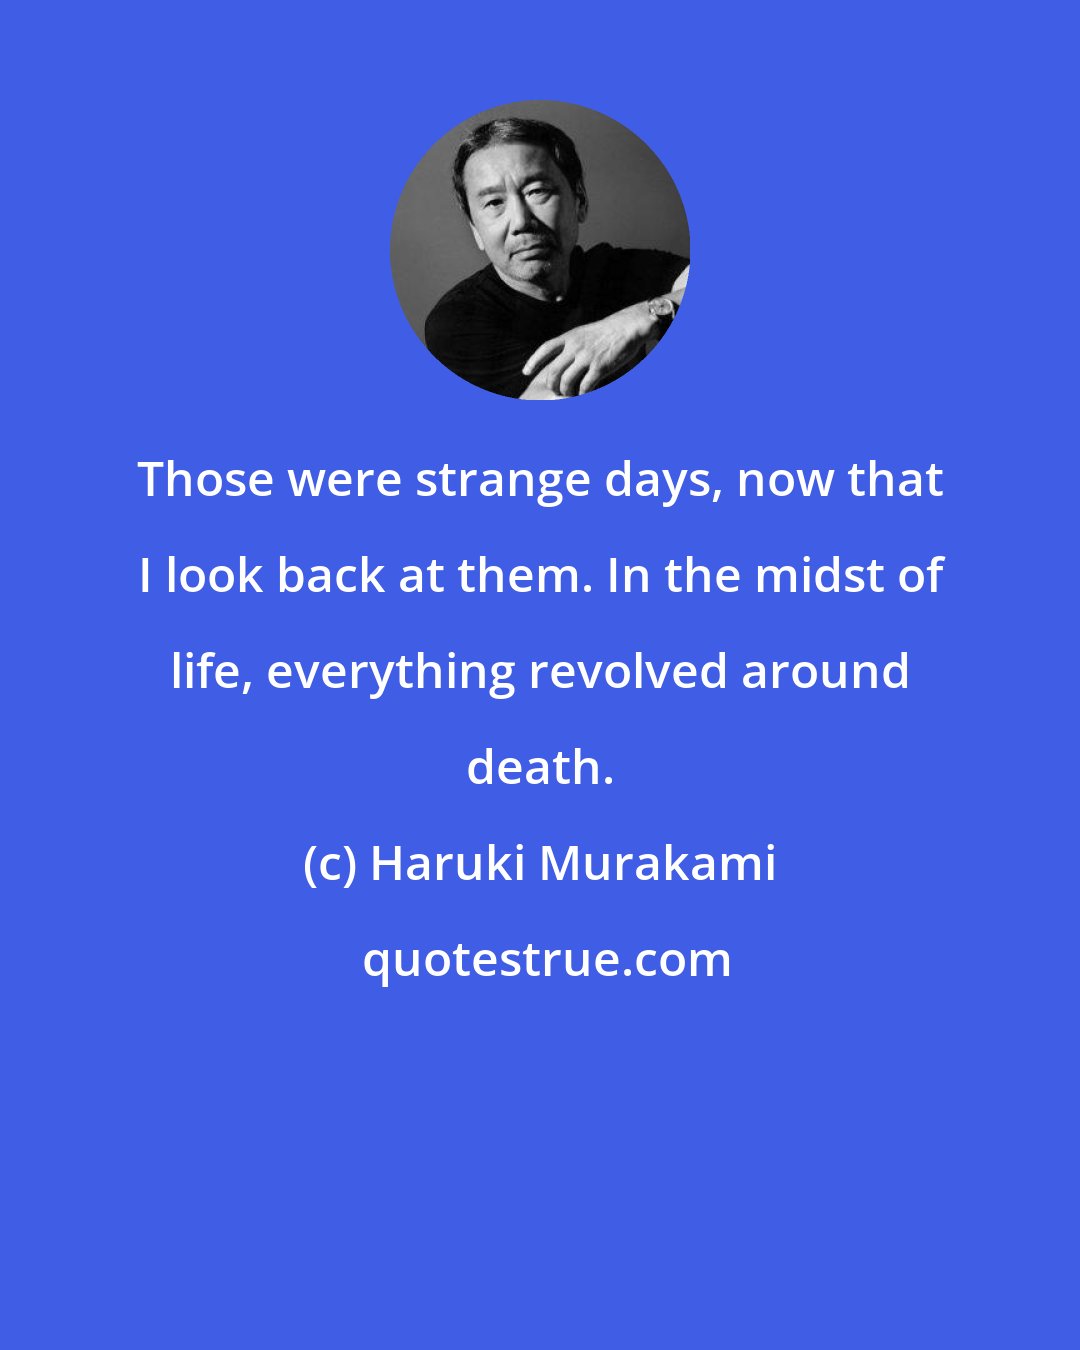 Haruki Murakami: Those were strange days, now that I look back at them. In the midst of life, everything revolved around death.